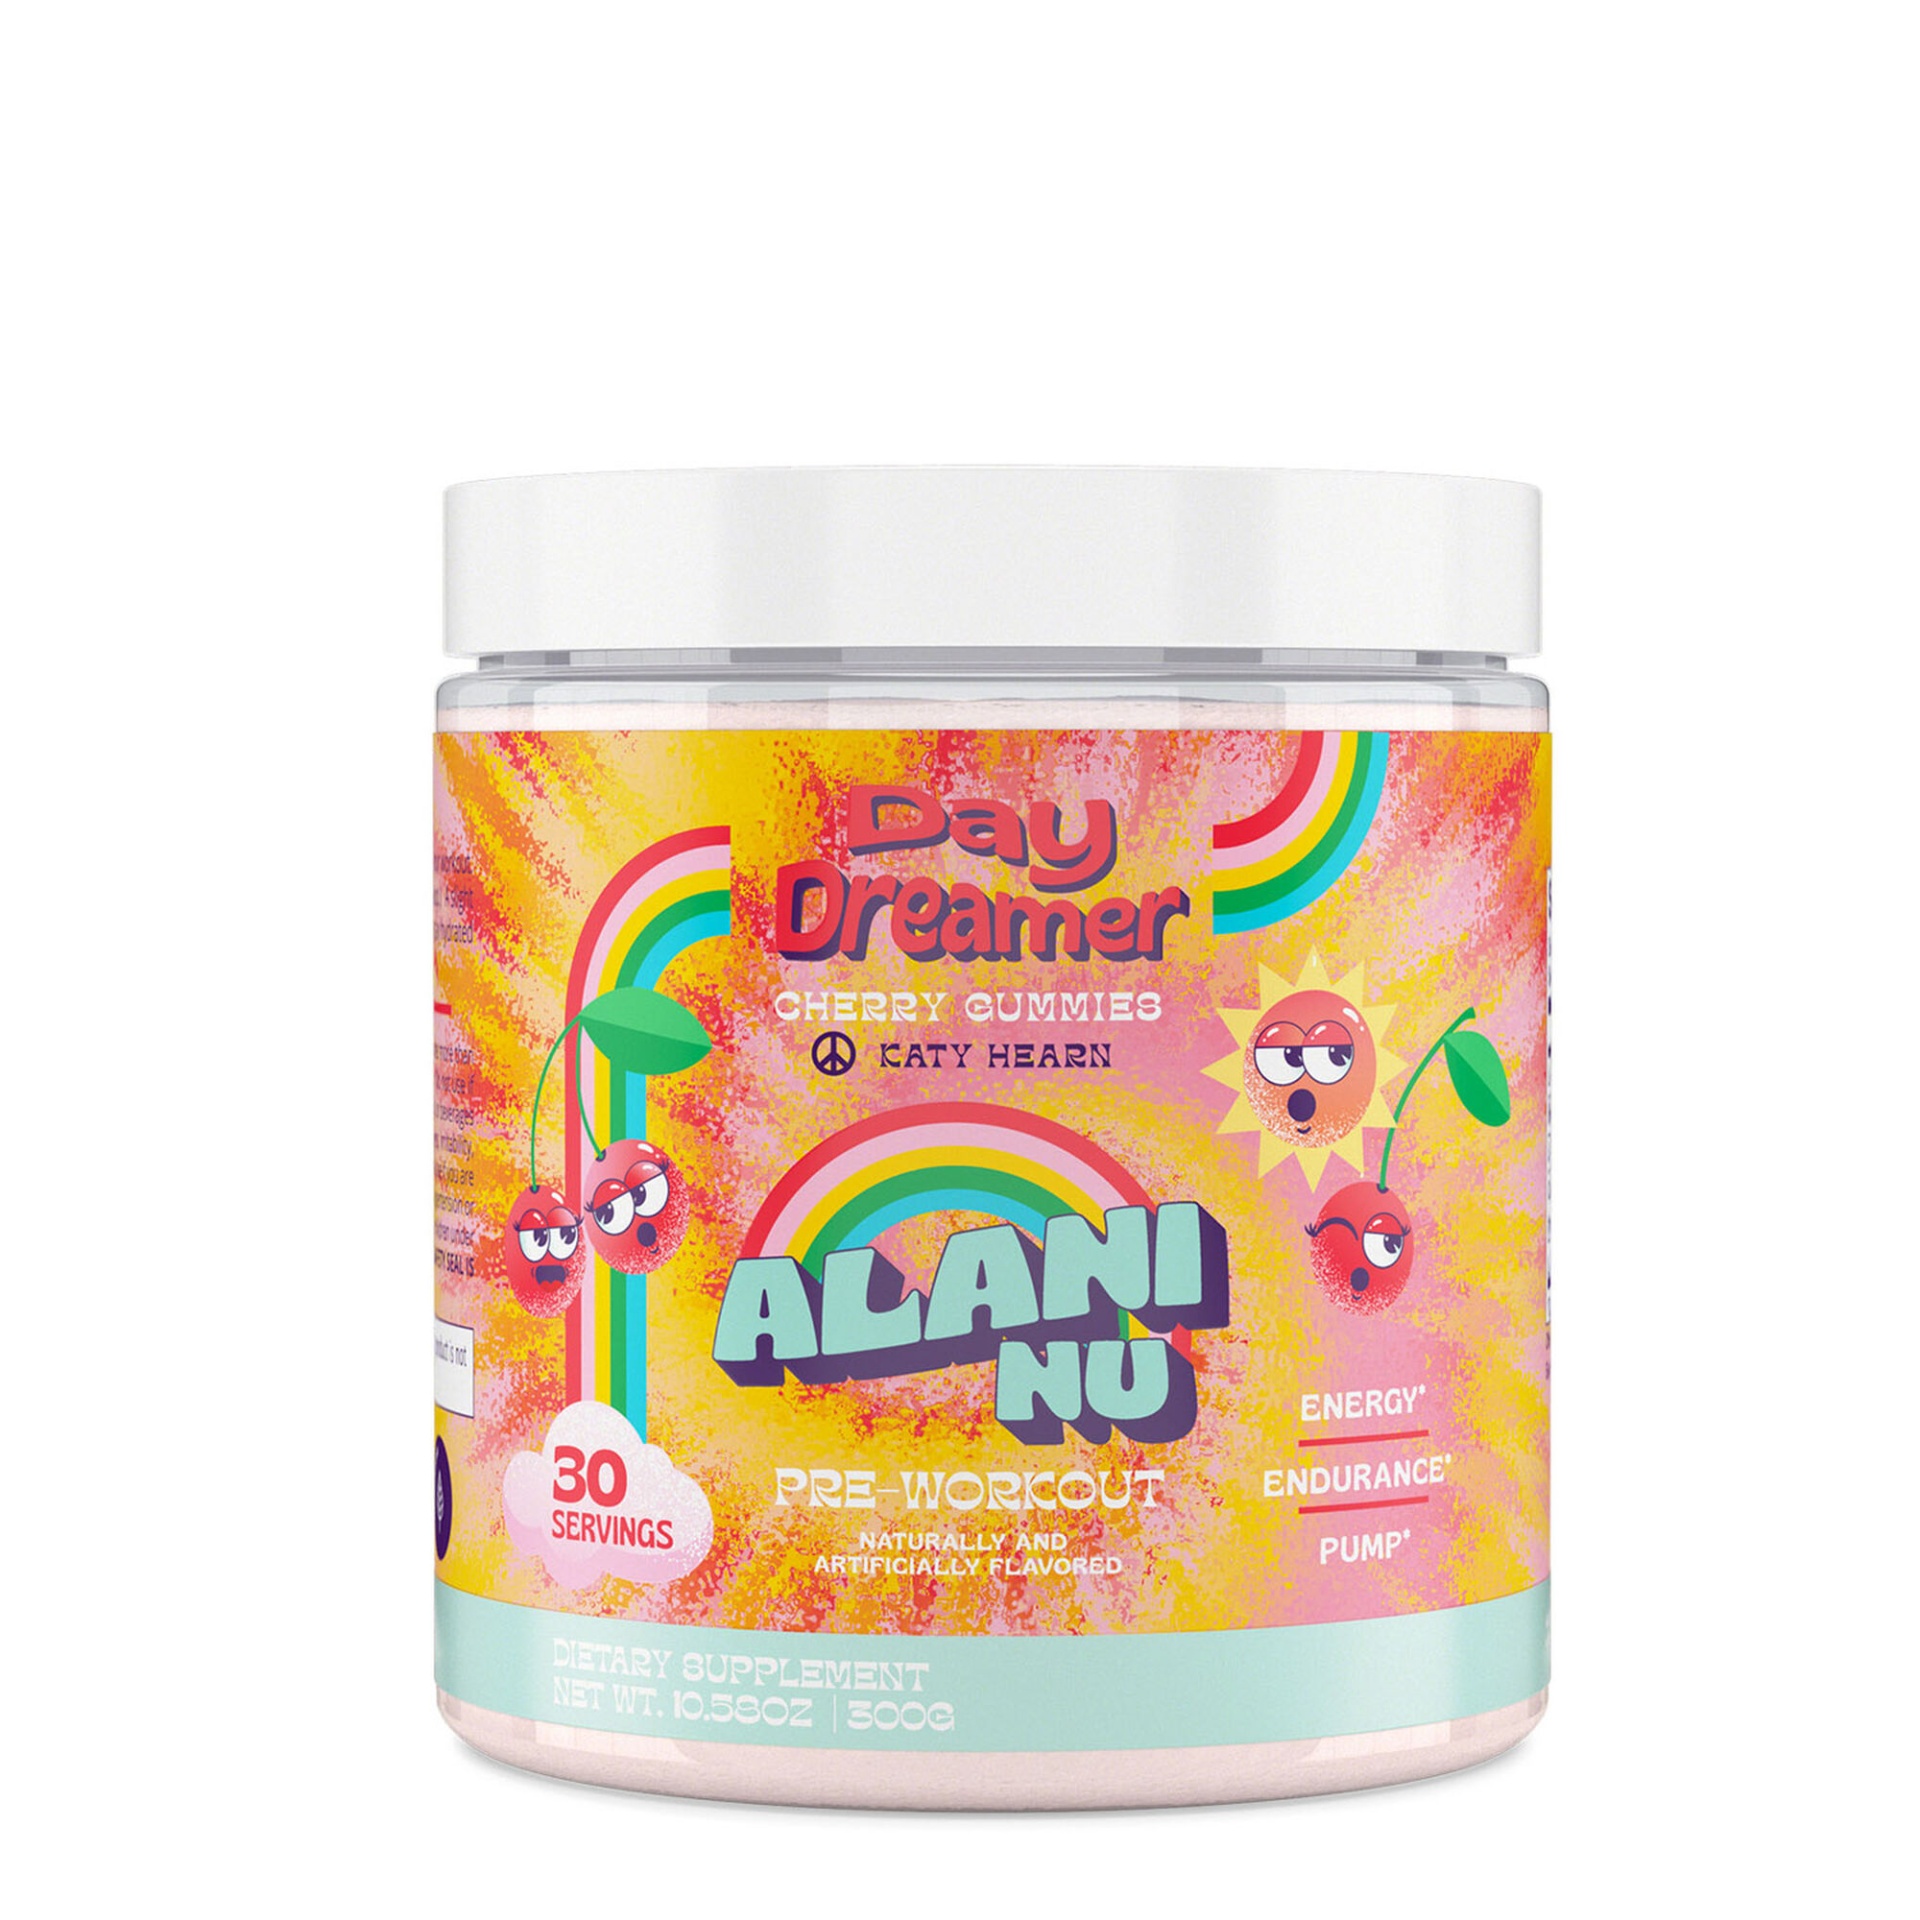 slide 1 of 1, Alani Nu Pre-Workout - Day Dreamer Cherry Gummies, 1 ct